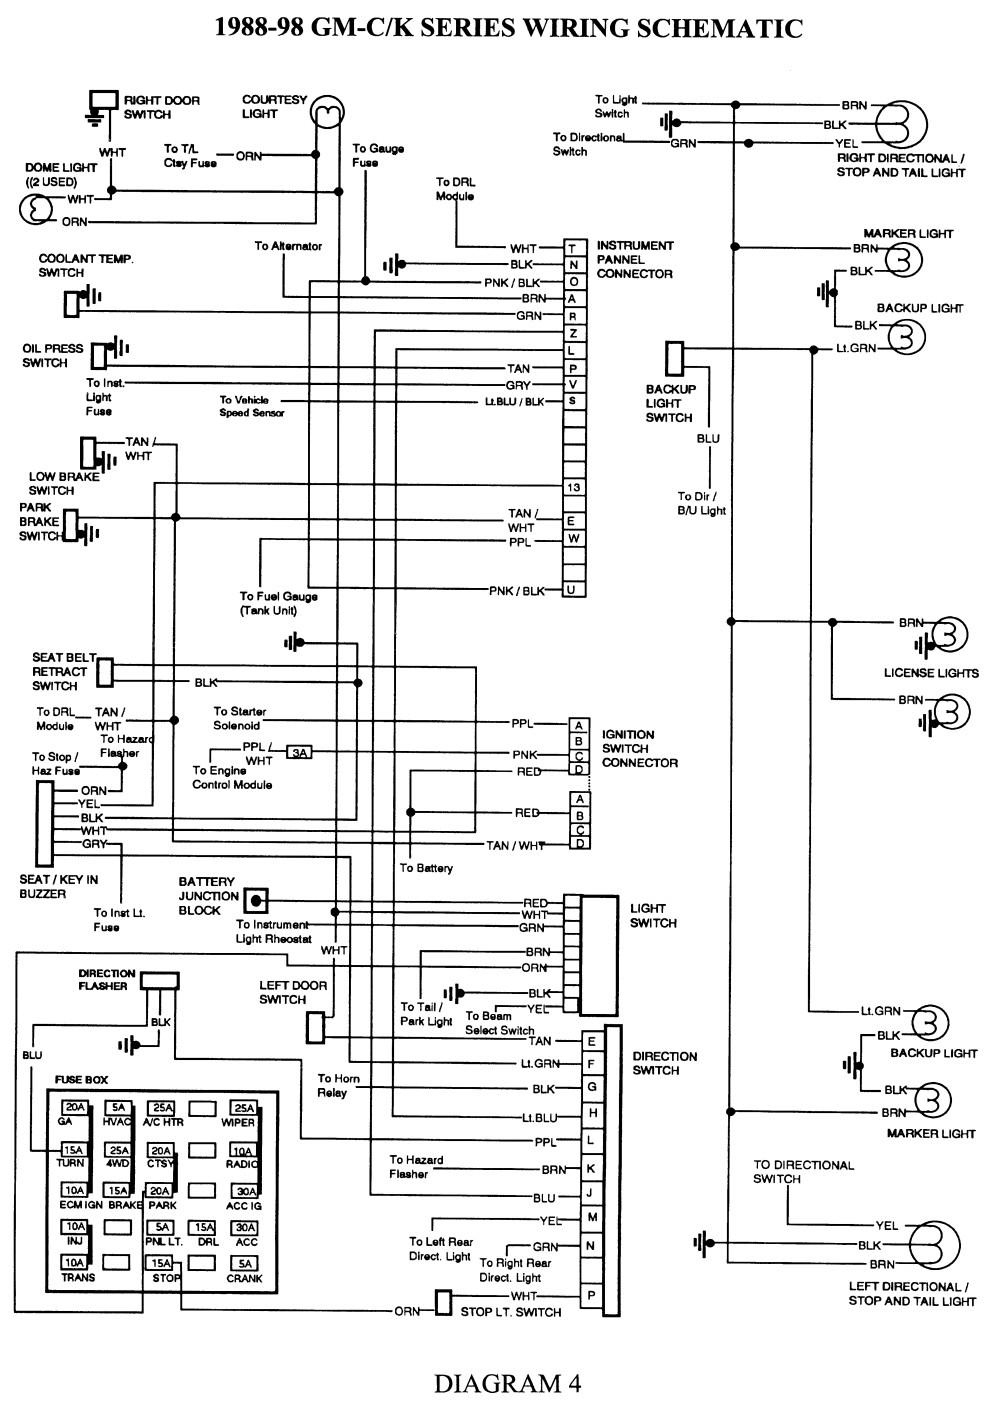 Awesome 2003 Chevy Silverado Wiring Diagram 62 With Additional Mach 460 Wiring Diagram with 2003 Chevy Silverado Wiring Diagram